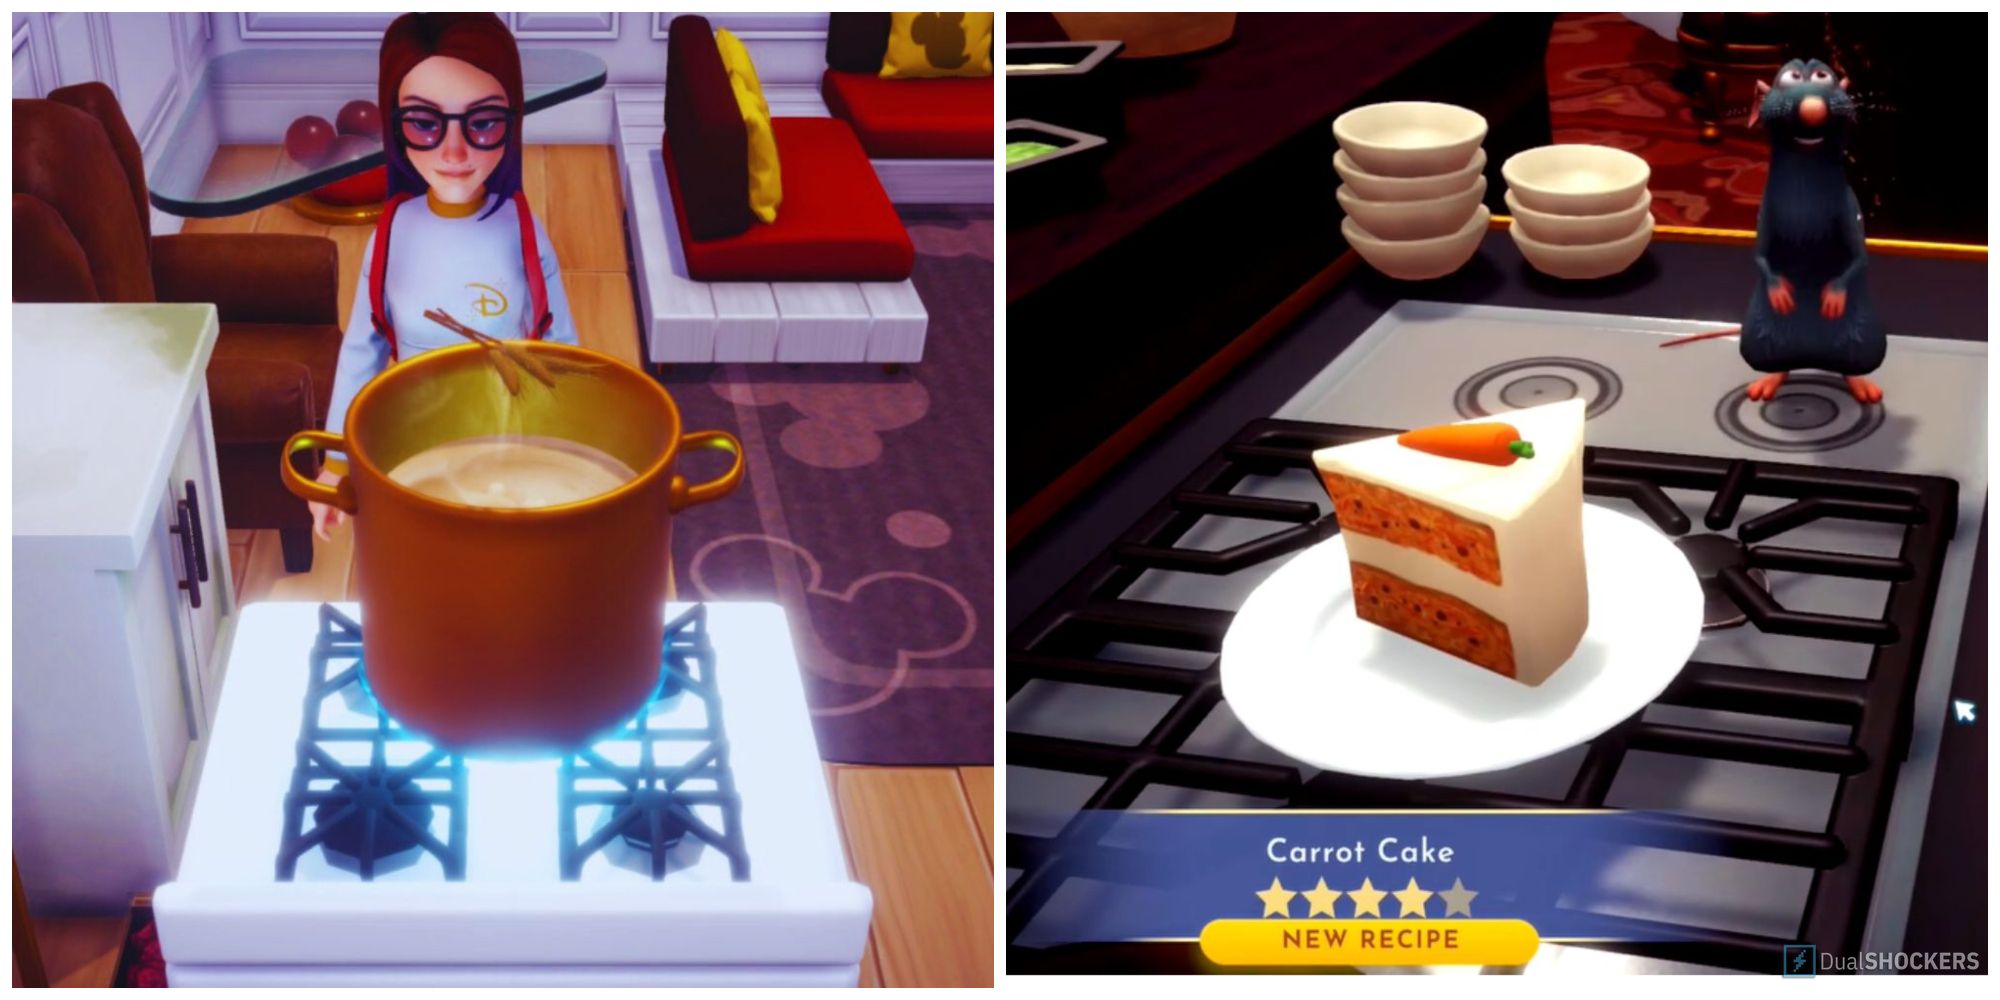 Carrot Cake Feature Image